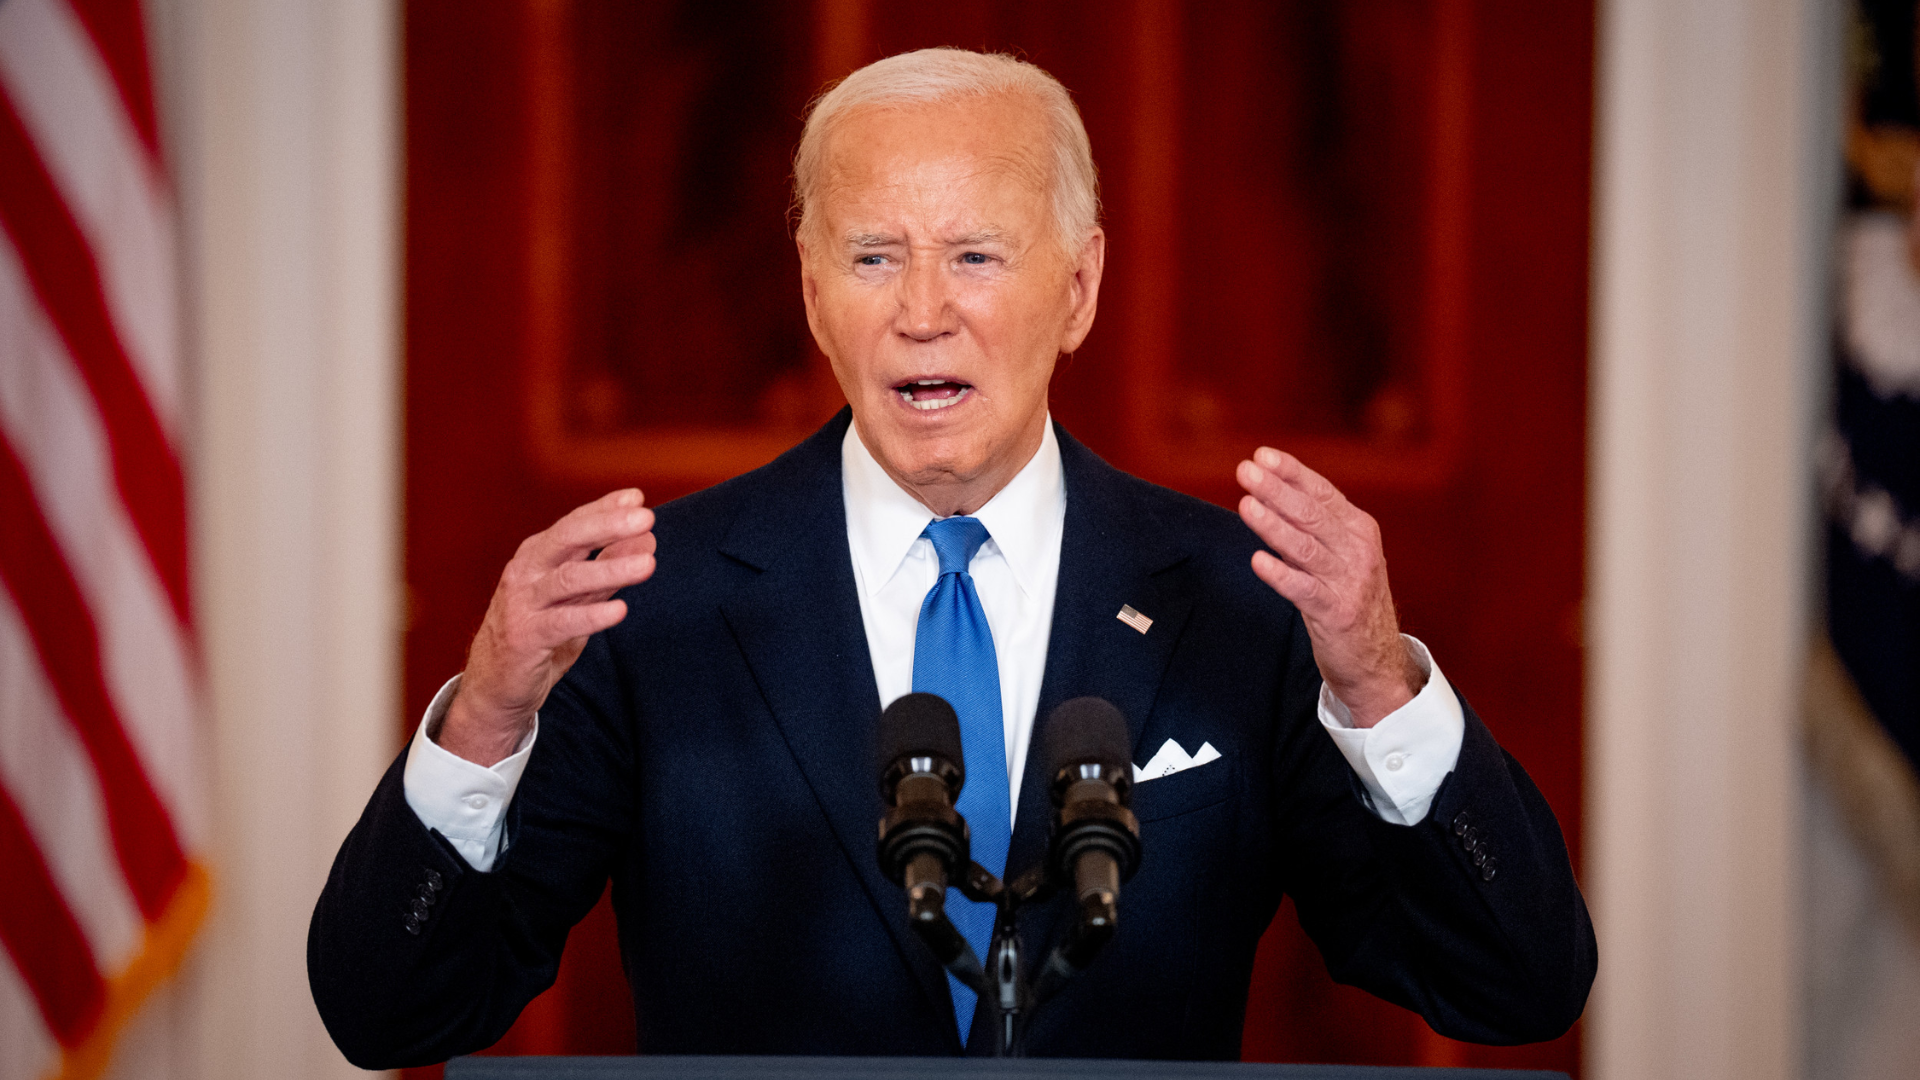 US President Biden Expresses Willingness To Undergo Neurological Exam, Is He Unfit For Office?